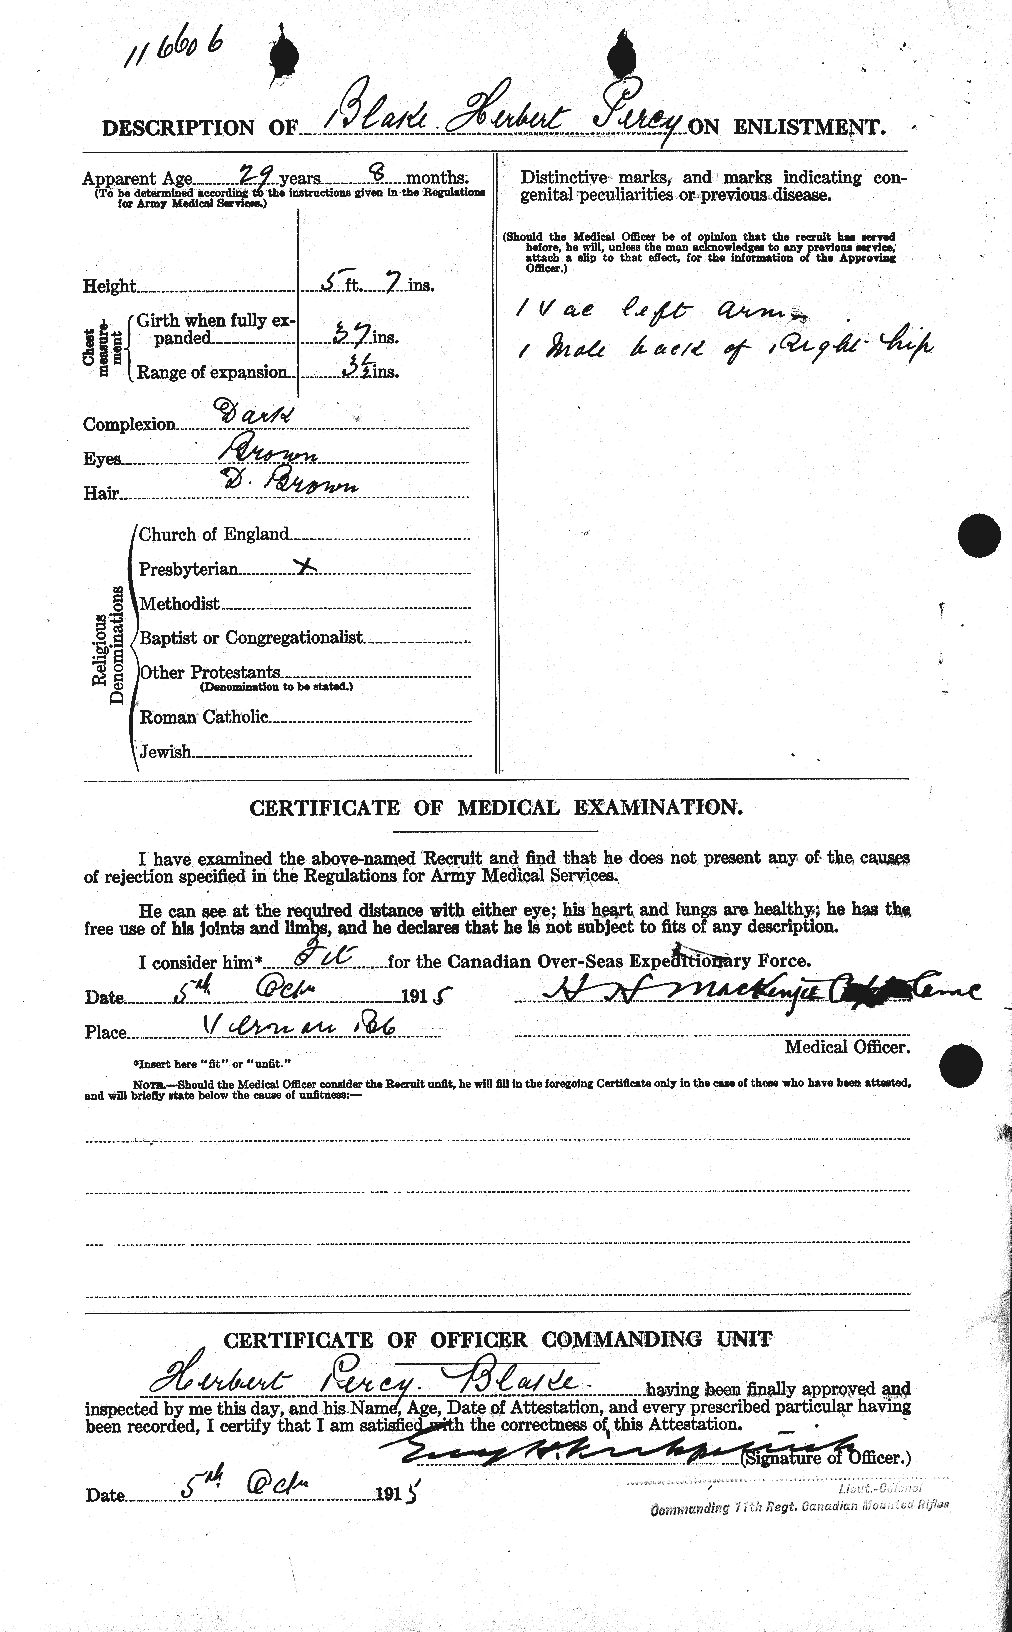 Personnel Records of the First World War - CEF 245894b